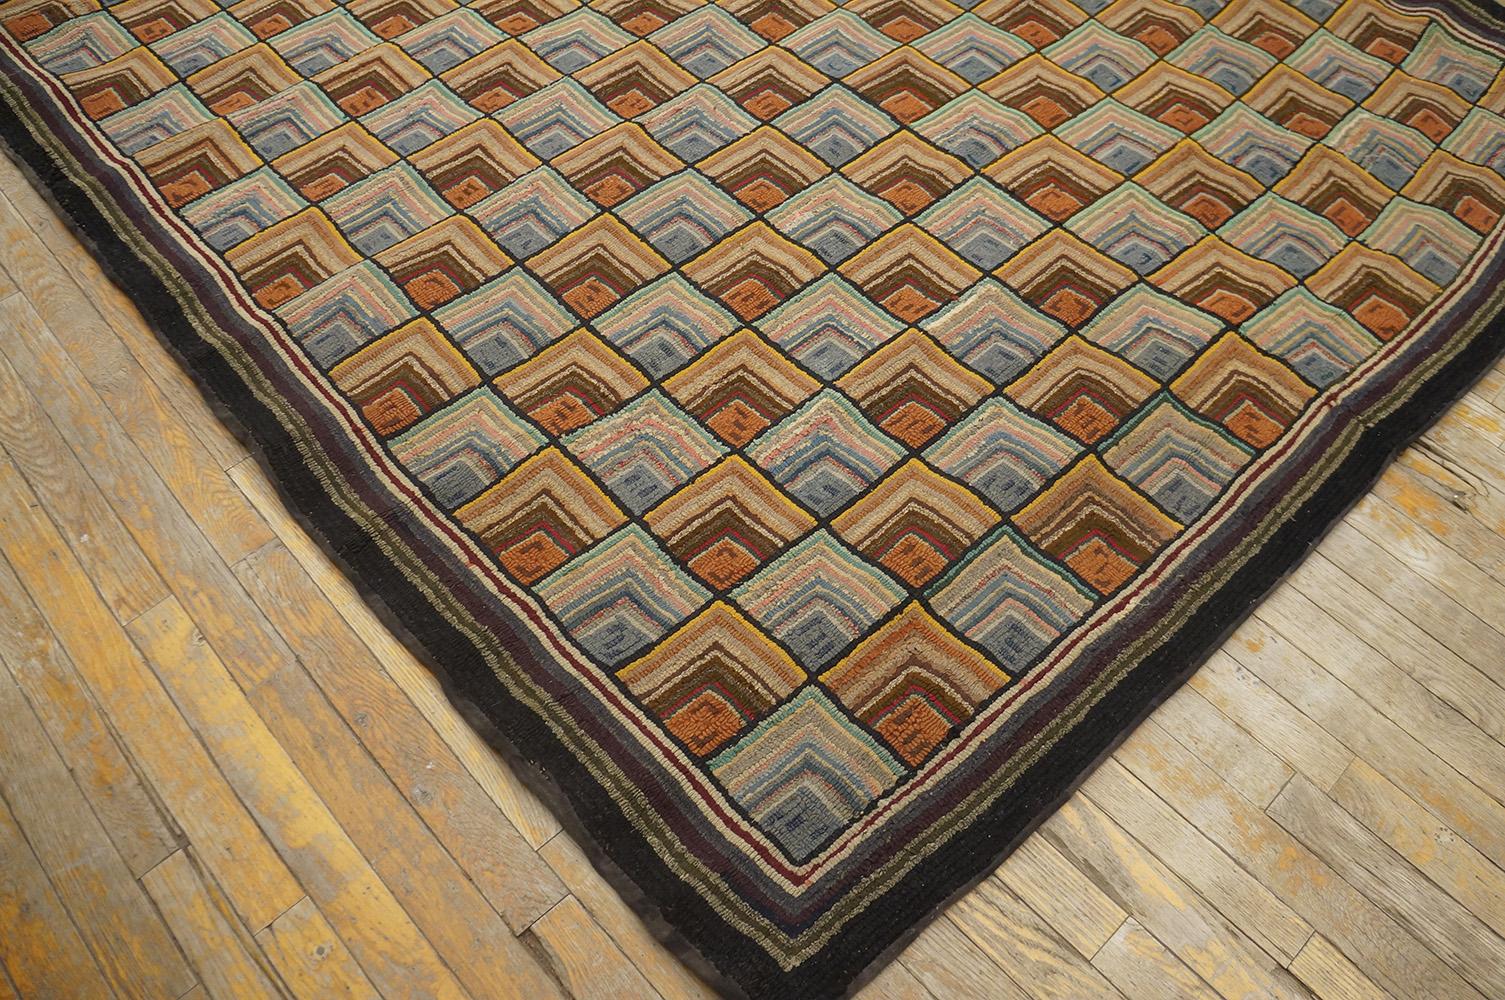 Hand-Woven Early 20th Century American Hooked Rug ( 6'3